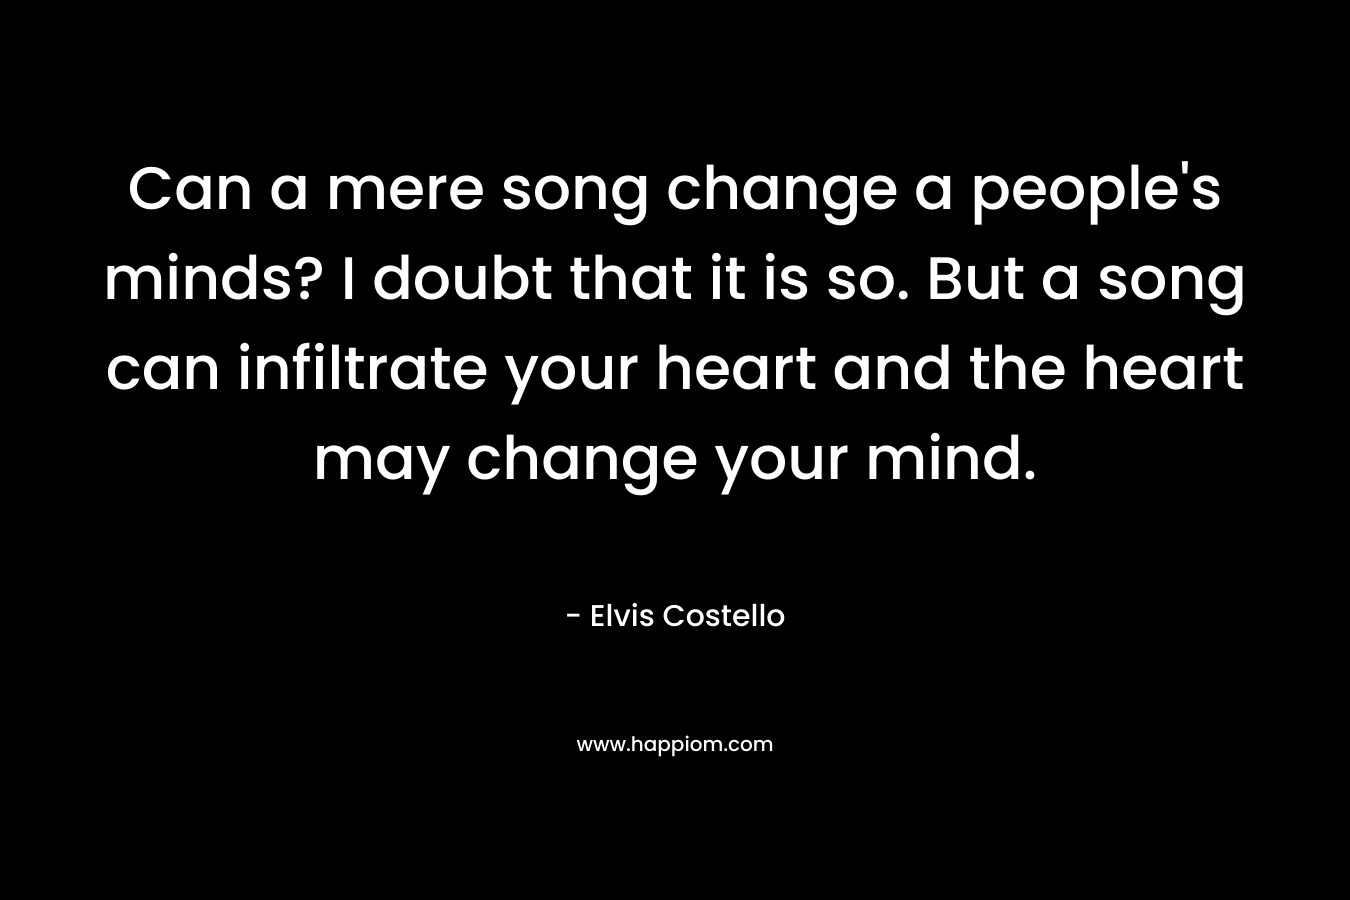 Can a mere song change a people's minds? I doubt that it is so. But a song can infiltrate your heart and the heart may change your mind.